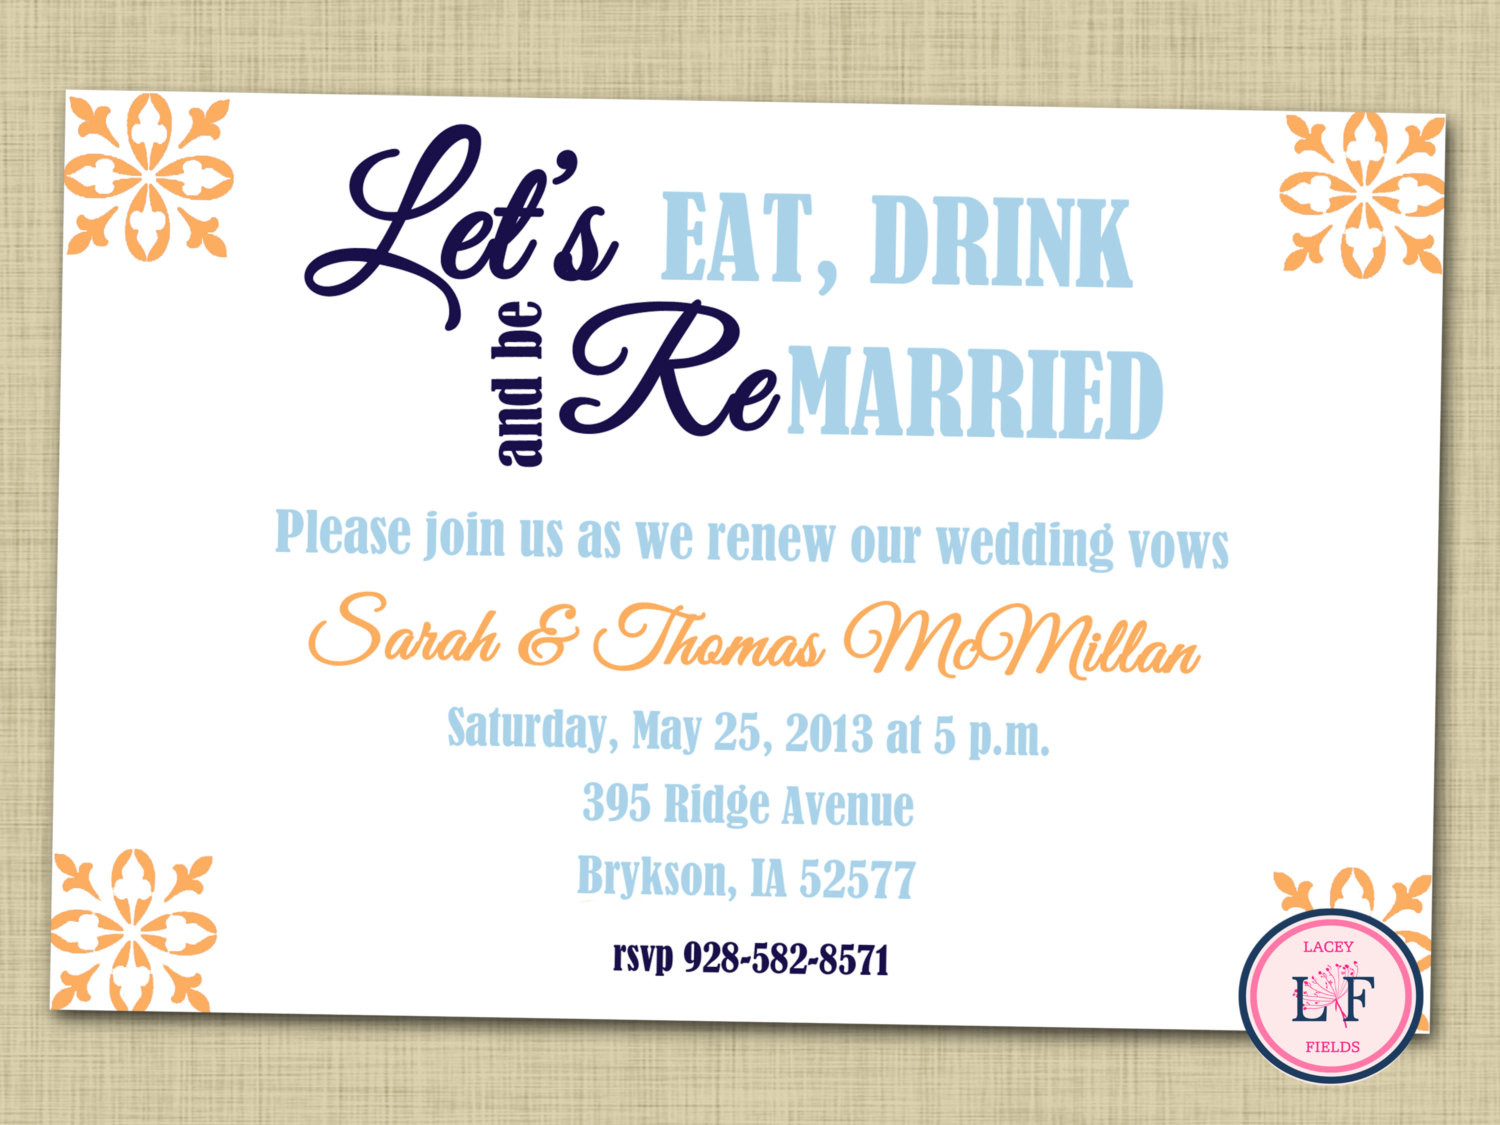 Wedding Renewal Vows Examples
 Vow renewal invitation printable Vow renewal party by